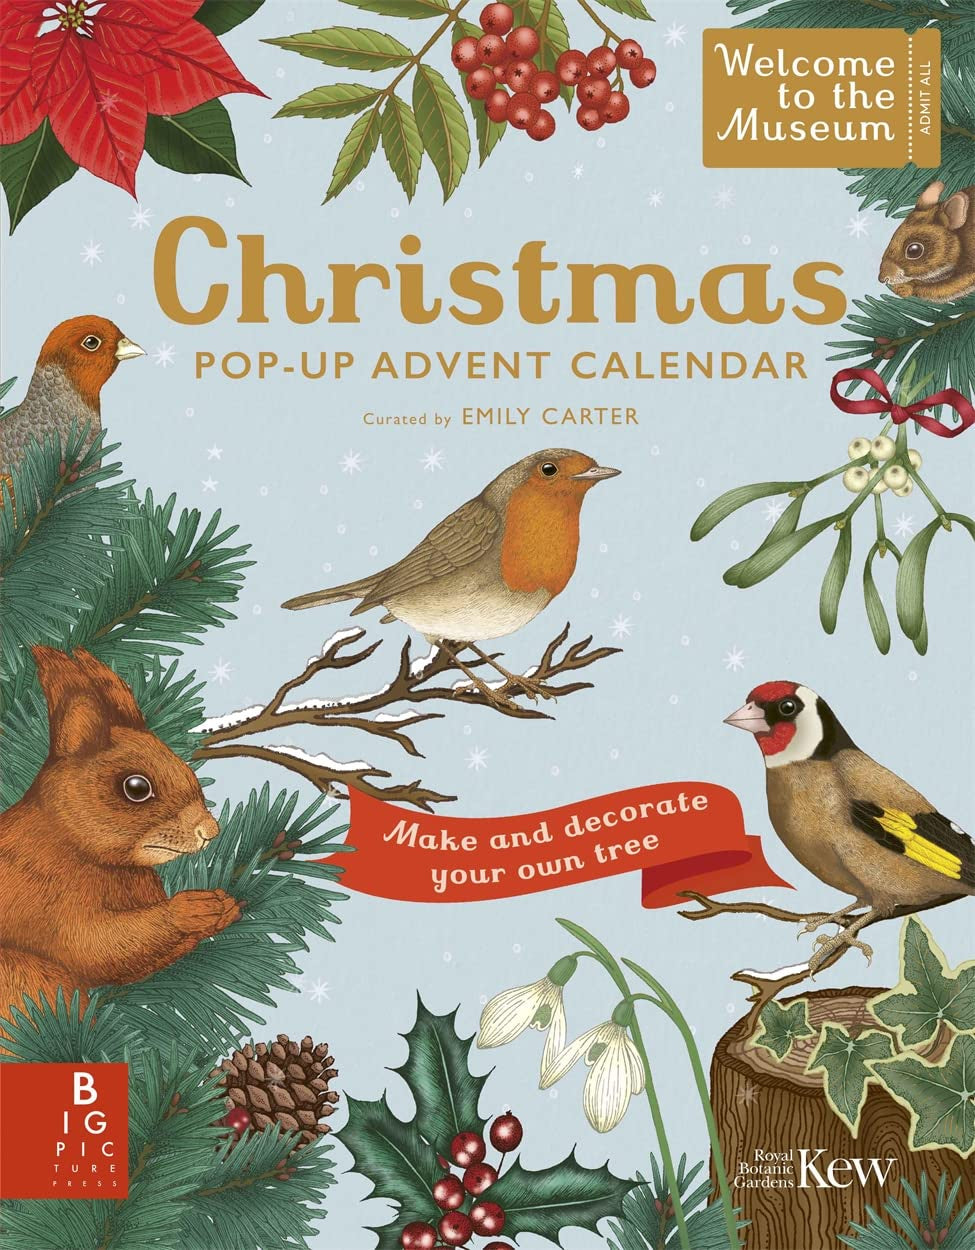 Welcome to the Museum: A Christmas Pop-Up Advent Calendar by Royal Botanic Gardens Kew